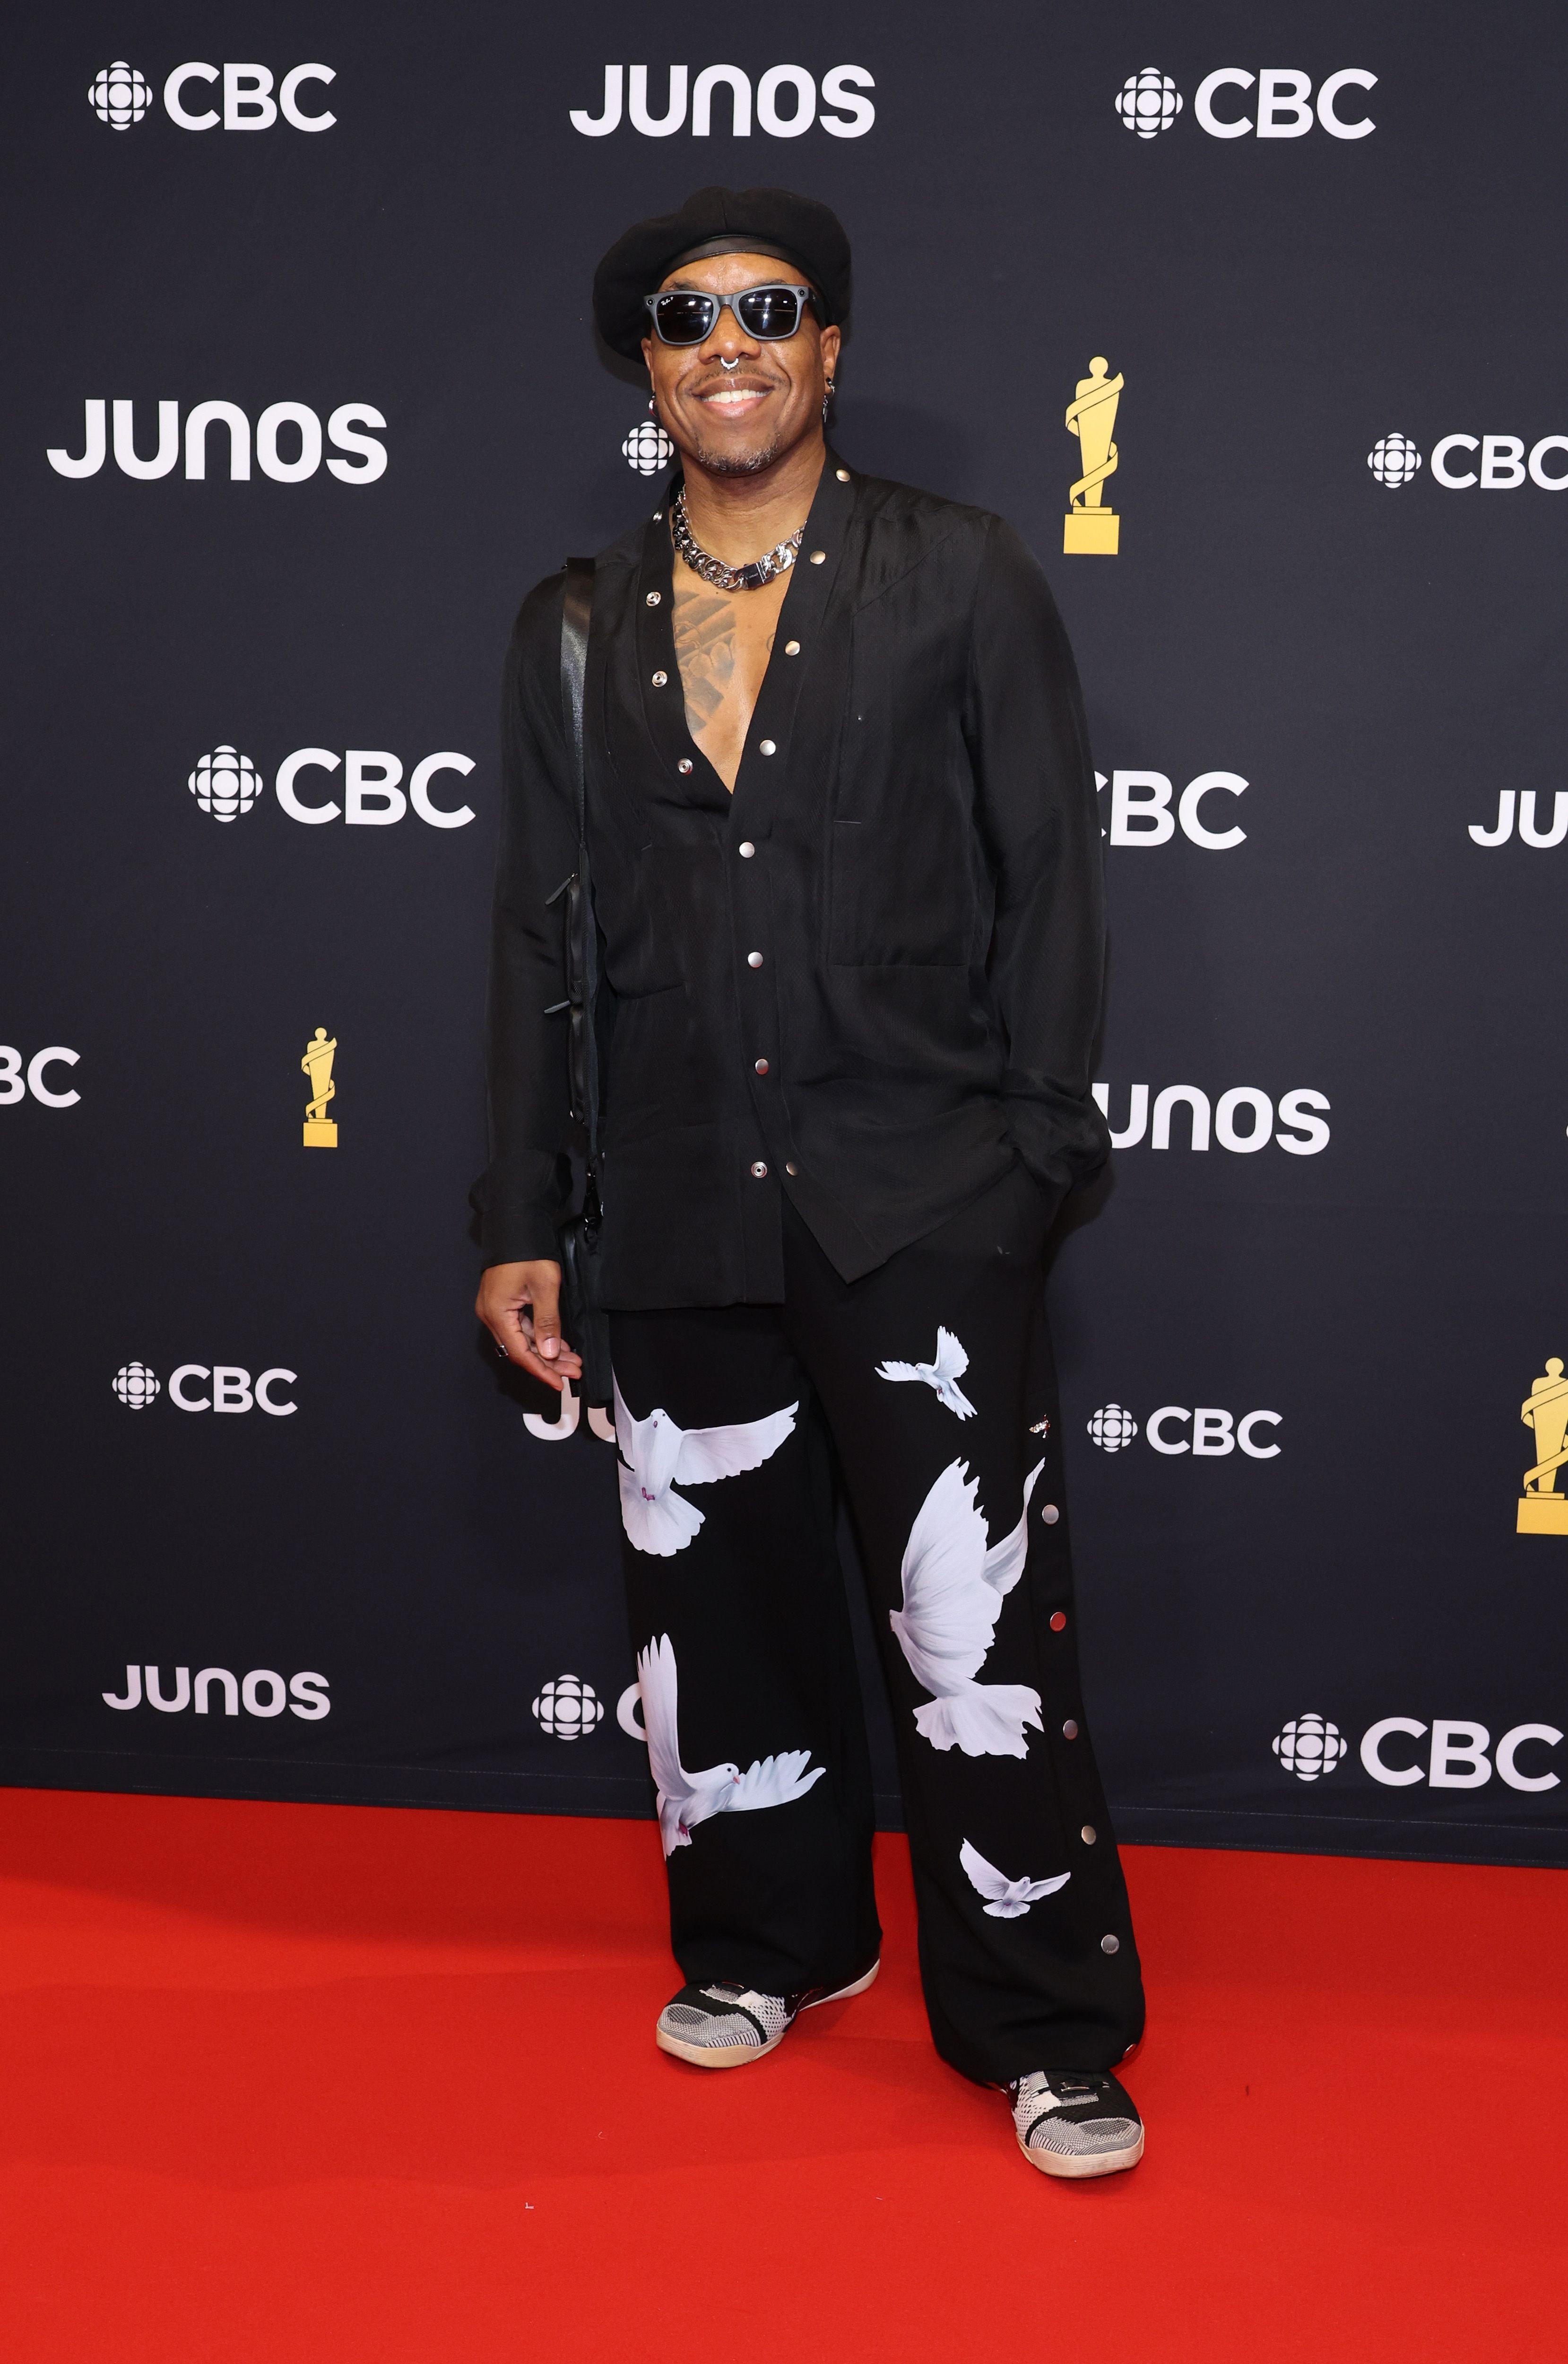 Person in black outfit with white dove print on red carpet at JUNOS event